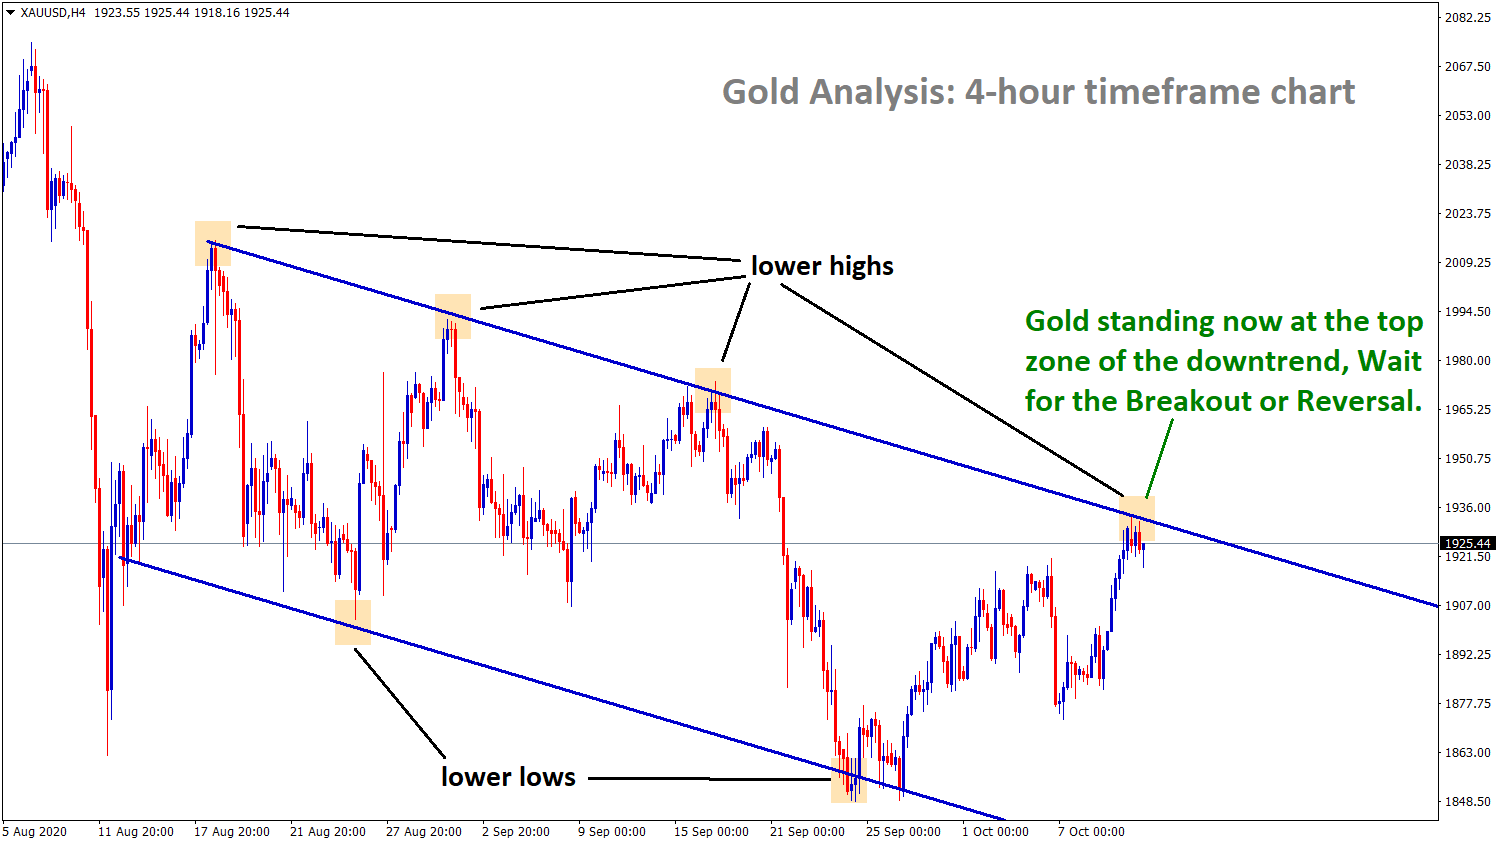 Gold standing at the top zone of the downtrend